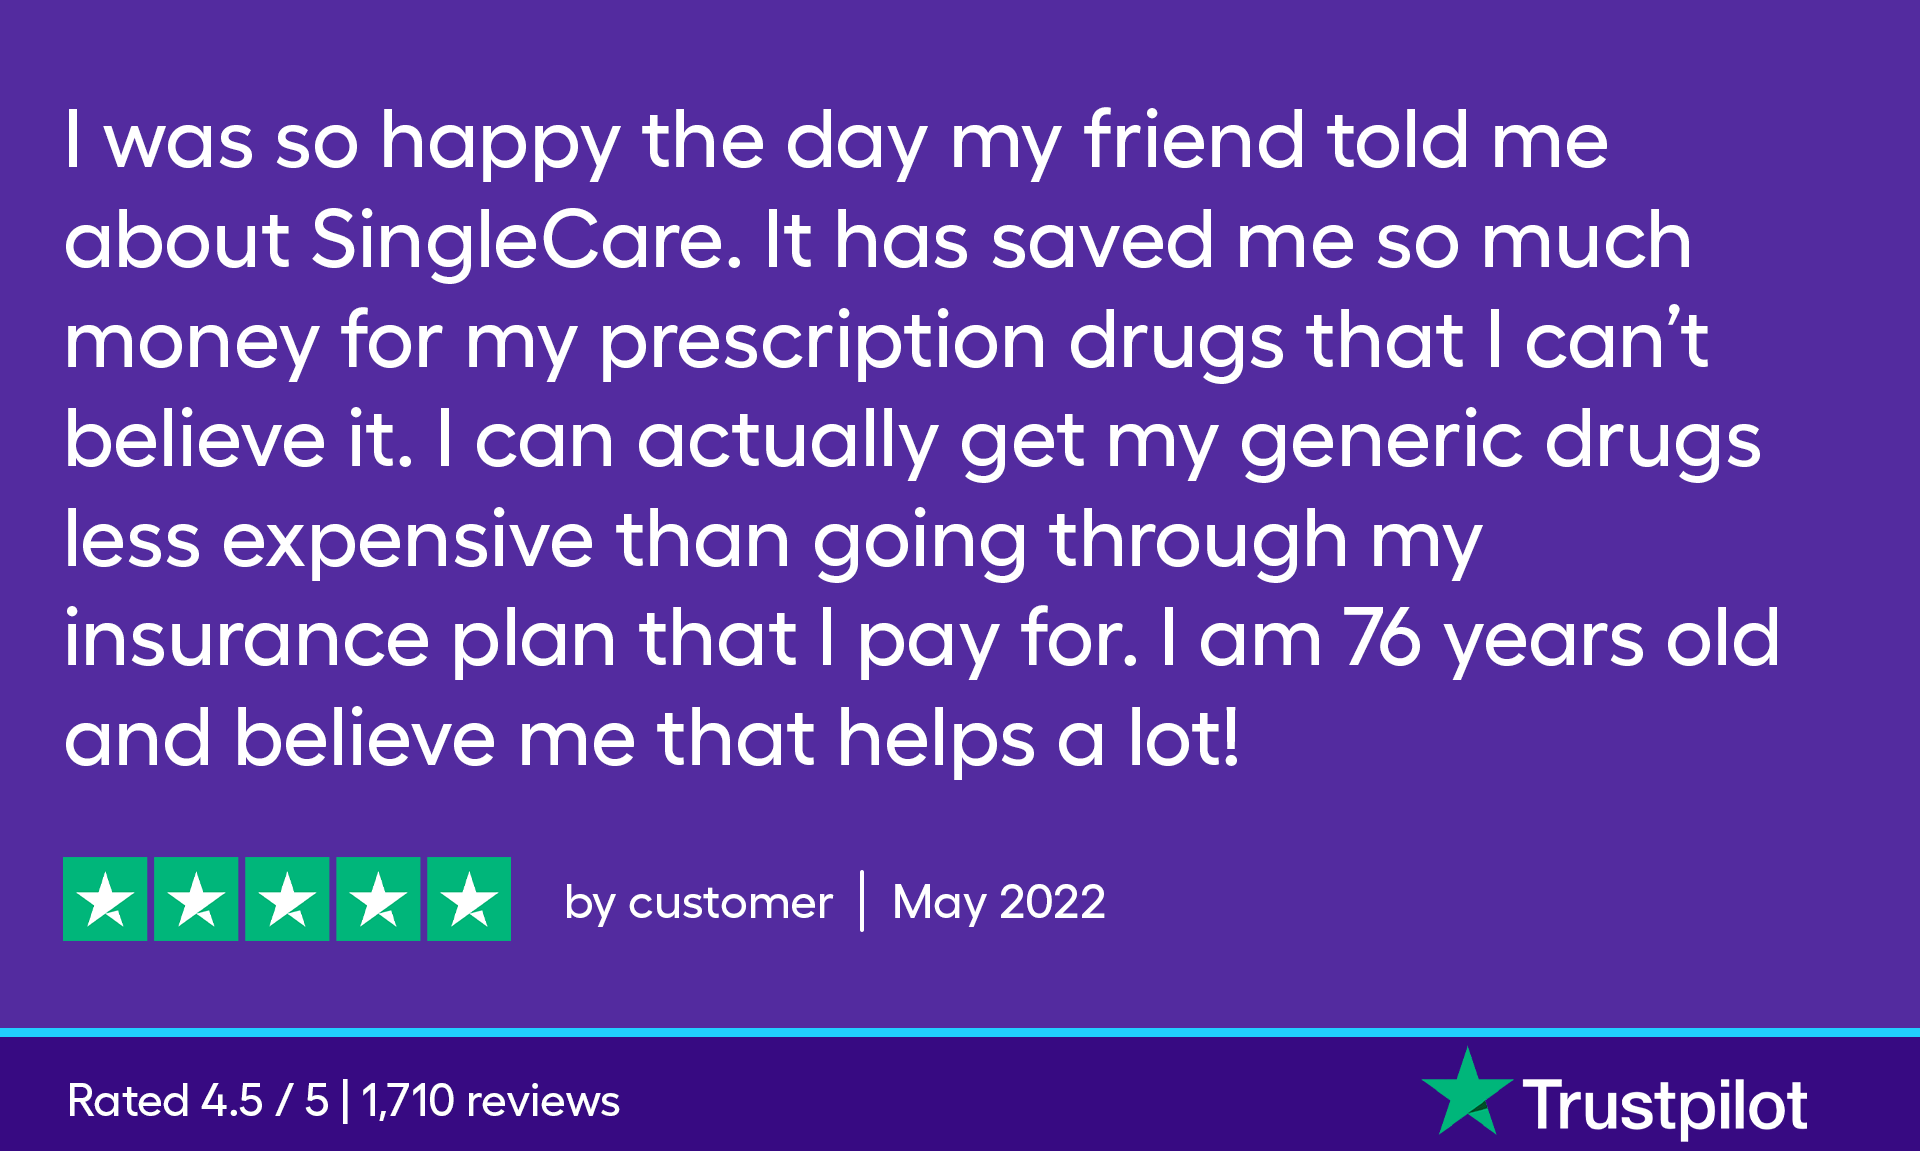 I was so happy the day my friend told me about SingleCare. It has saved me so much money for my prescription drugs that I can't believe it. I can actually get my generic drugs less expensive than going through my insurance plan that I pay for. I am 76 years old and believe me that helps a lot!